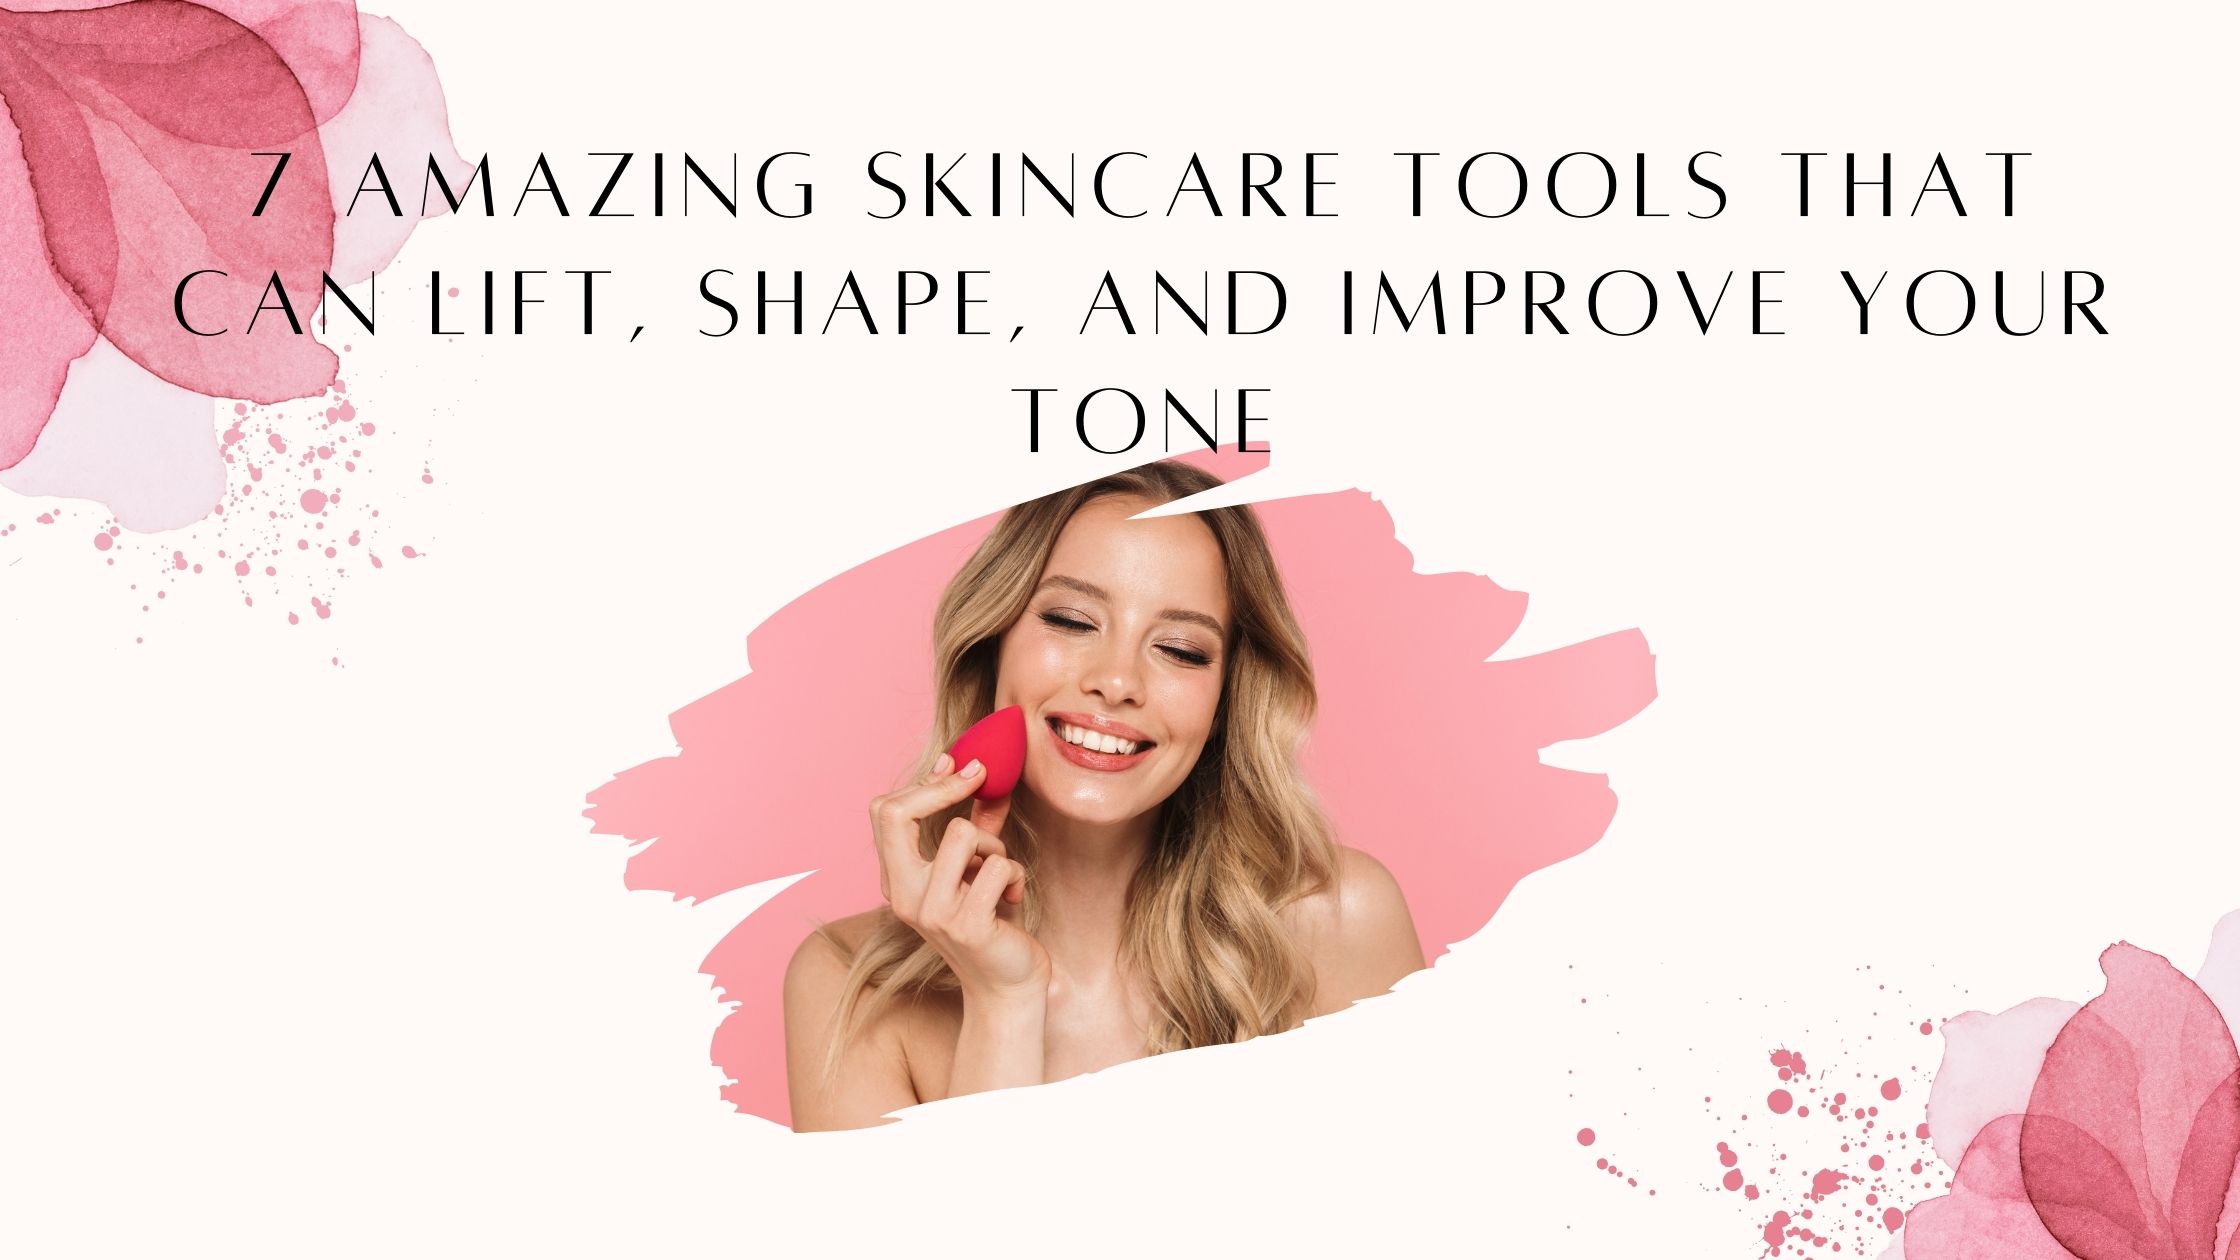 7 amazing skincare tools that can lift, shape, and improve your tone